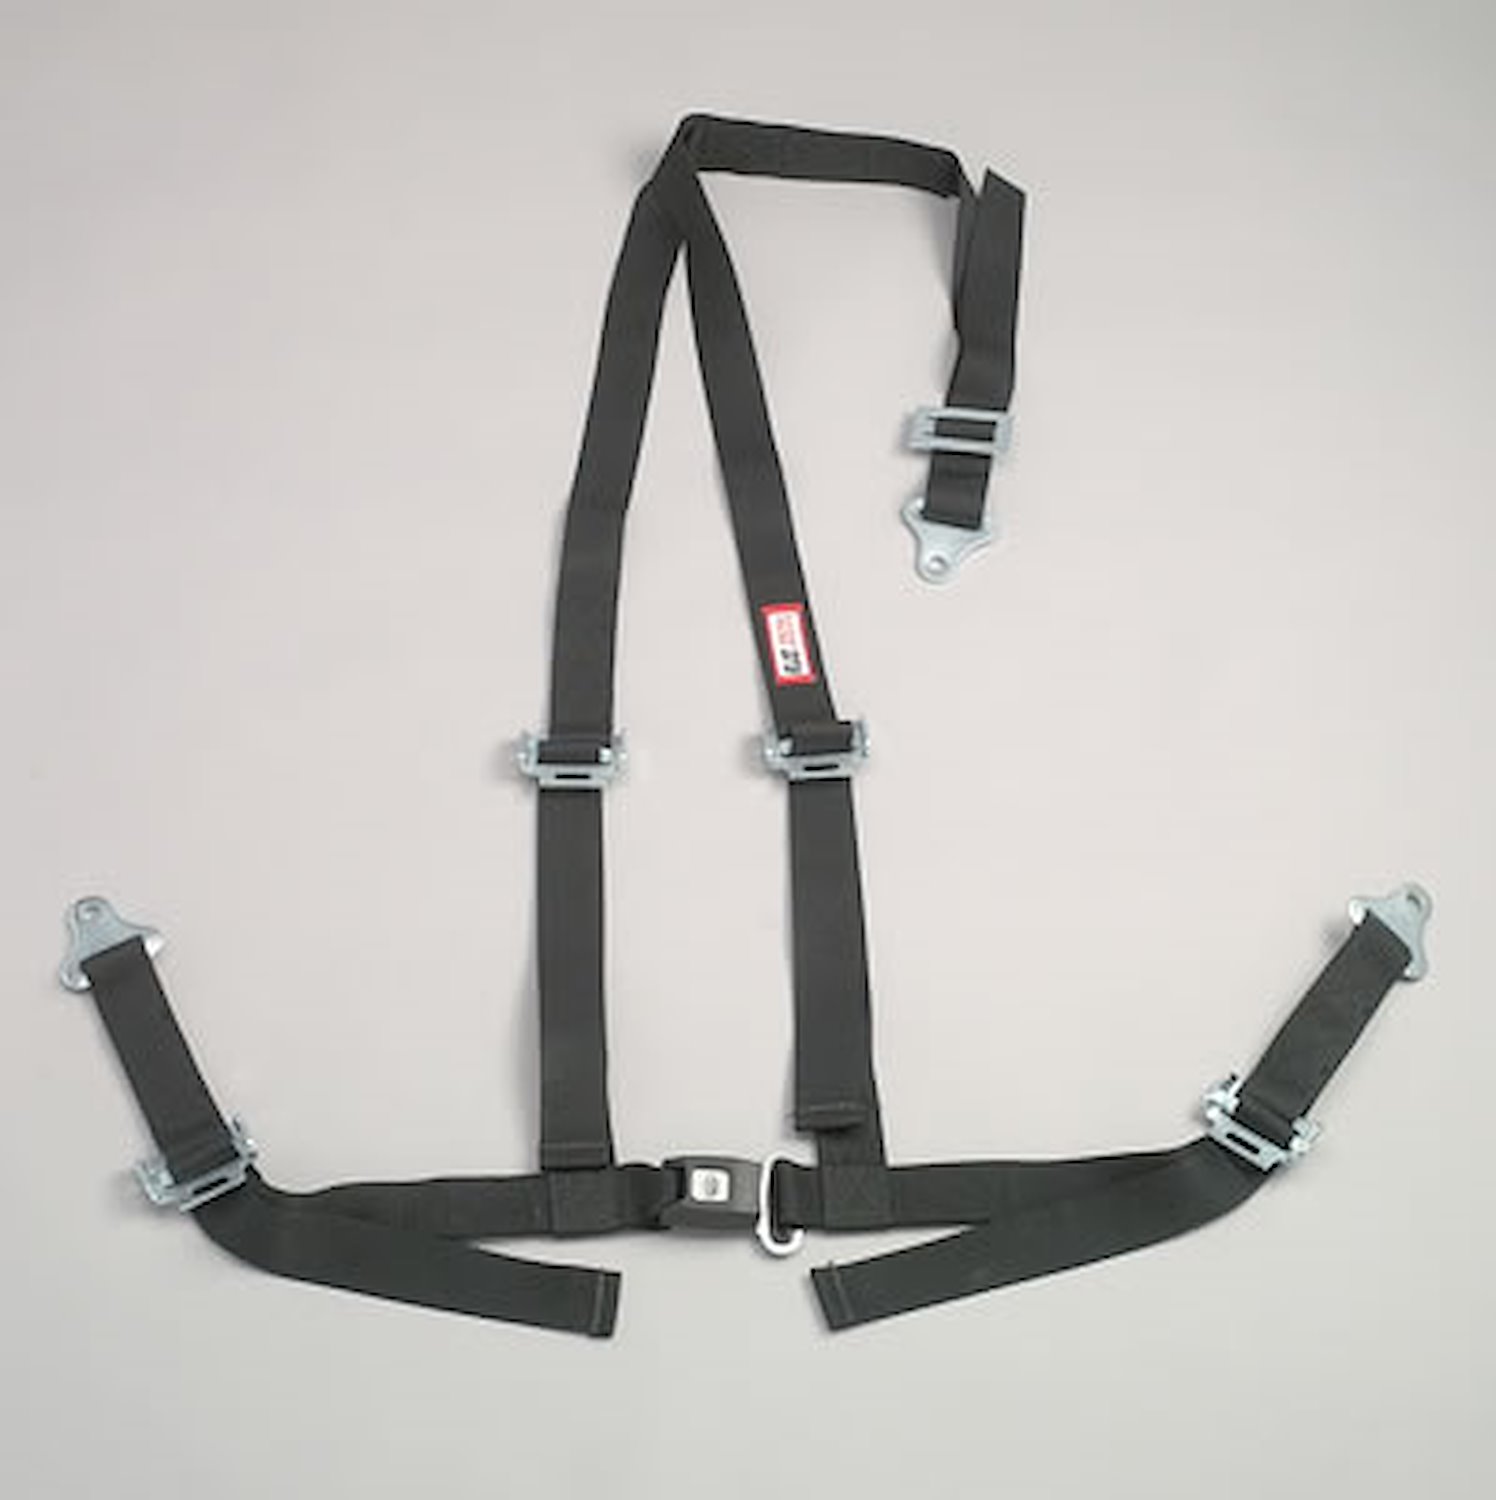 NON-SFI B&T HARNESS 2 PULL UP Lap Belt SNAP 2 S. H. Individual FLOOR Mount WRAP/BOLT w/STERNUM STRAP RED